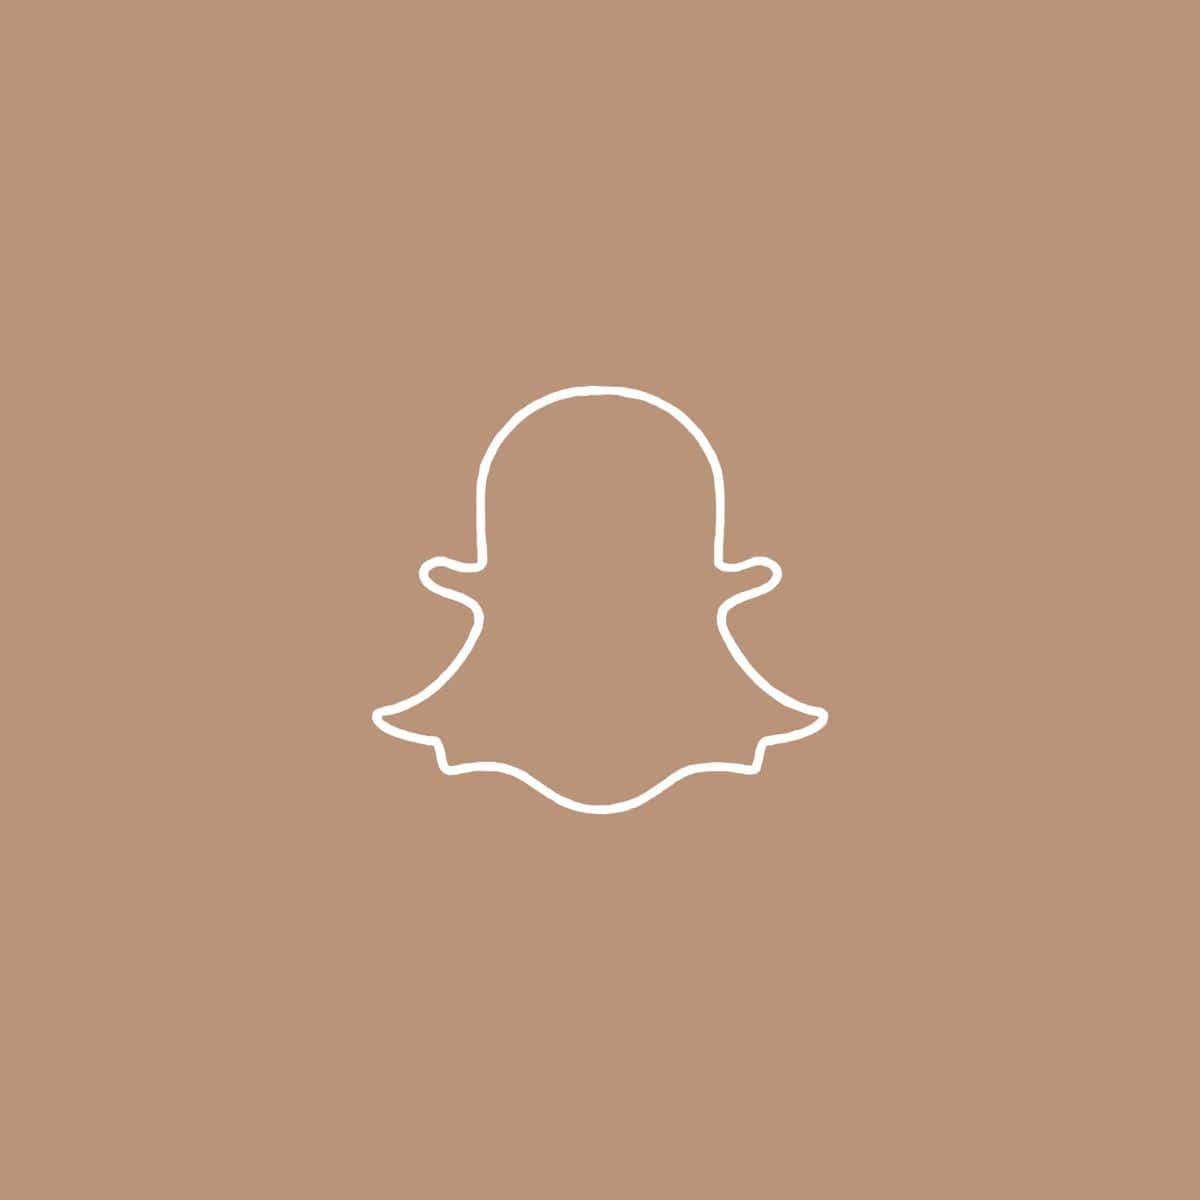 Capture life's moments with Snap